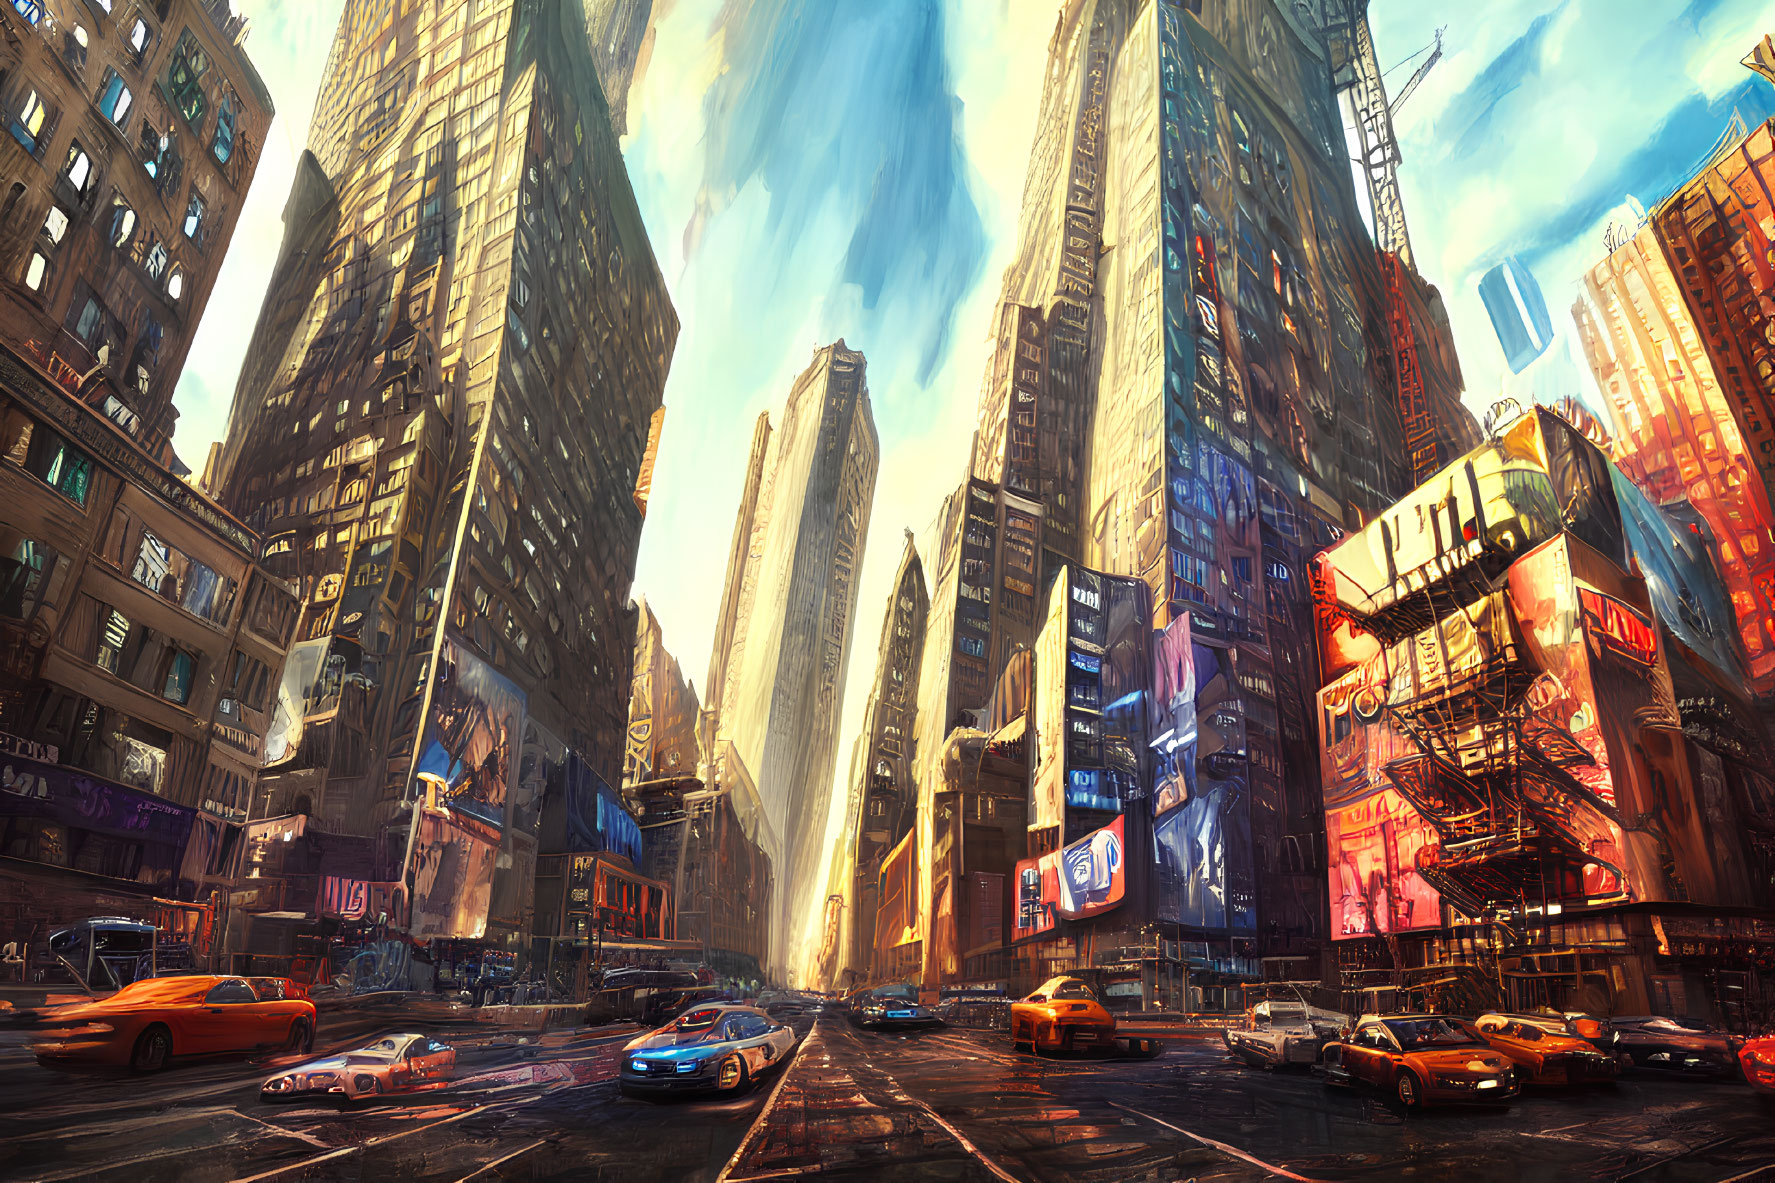 City street scene with tall buildings, billboards, cars, and sunny sky